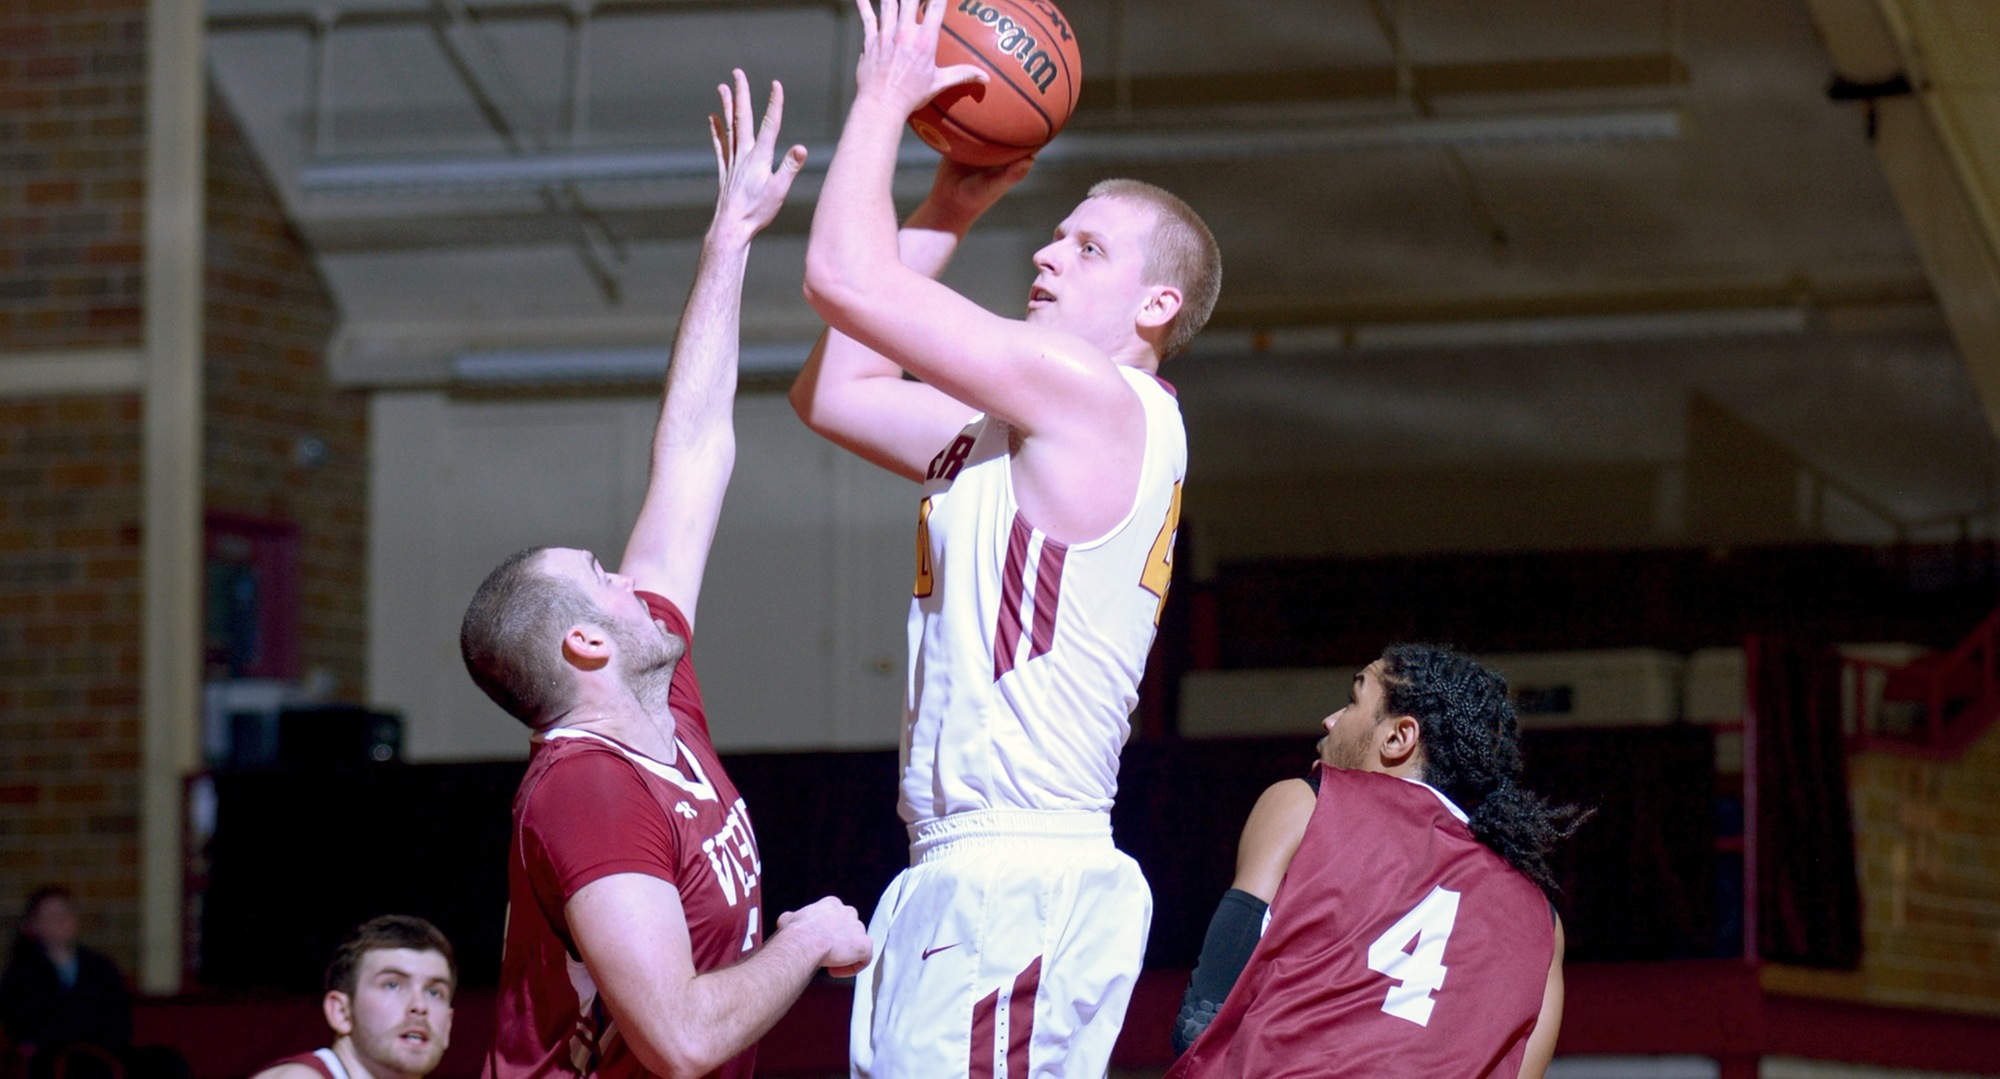 Junior Austin Heins had a game-high 18 points in the Cobbers' loss at Hamline. Heins is averaging 17.0 ppg in the last four games.